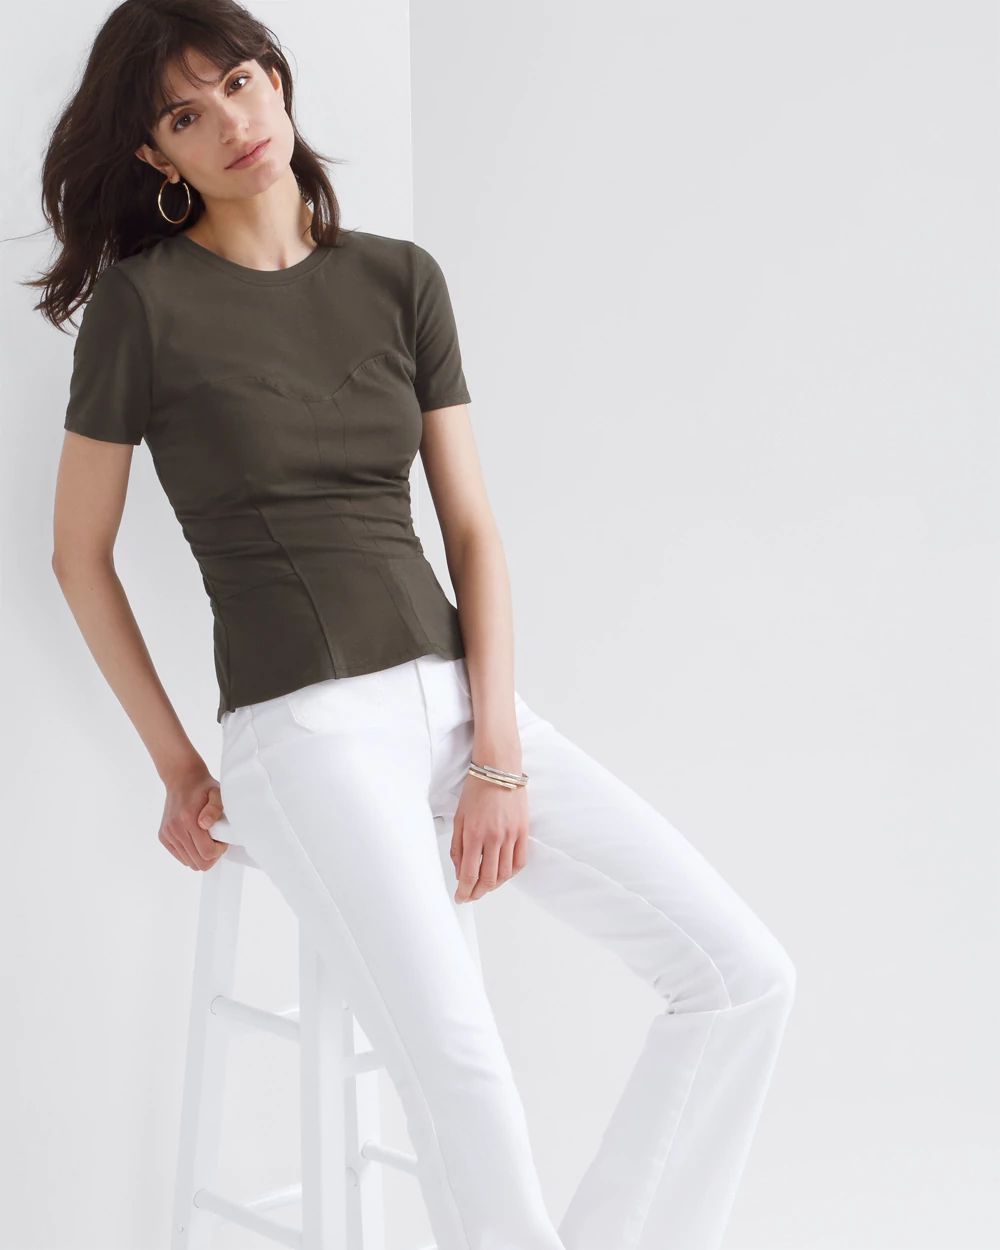 Short Sleeve Seamed Peplum Tee click to view larger image.